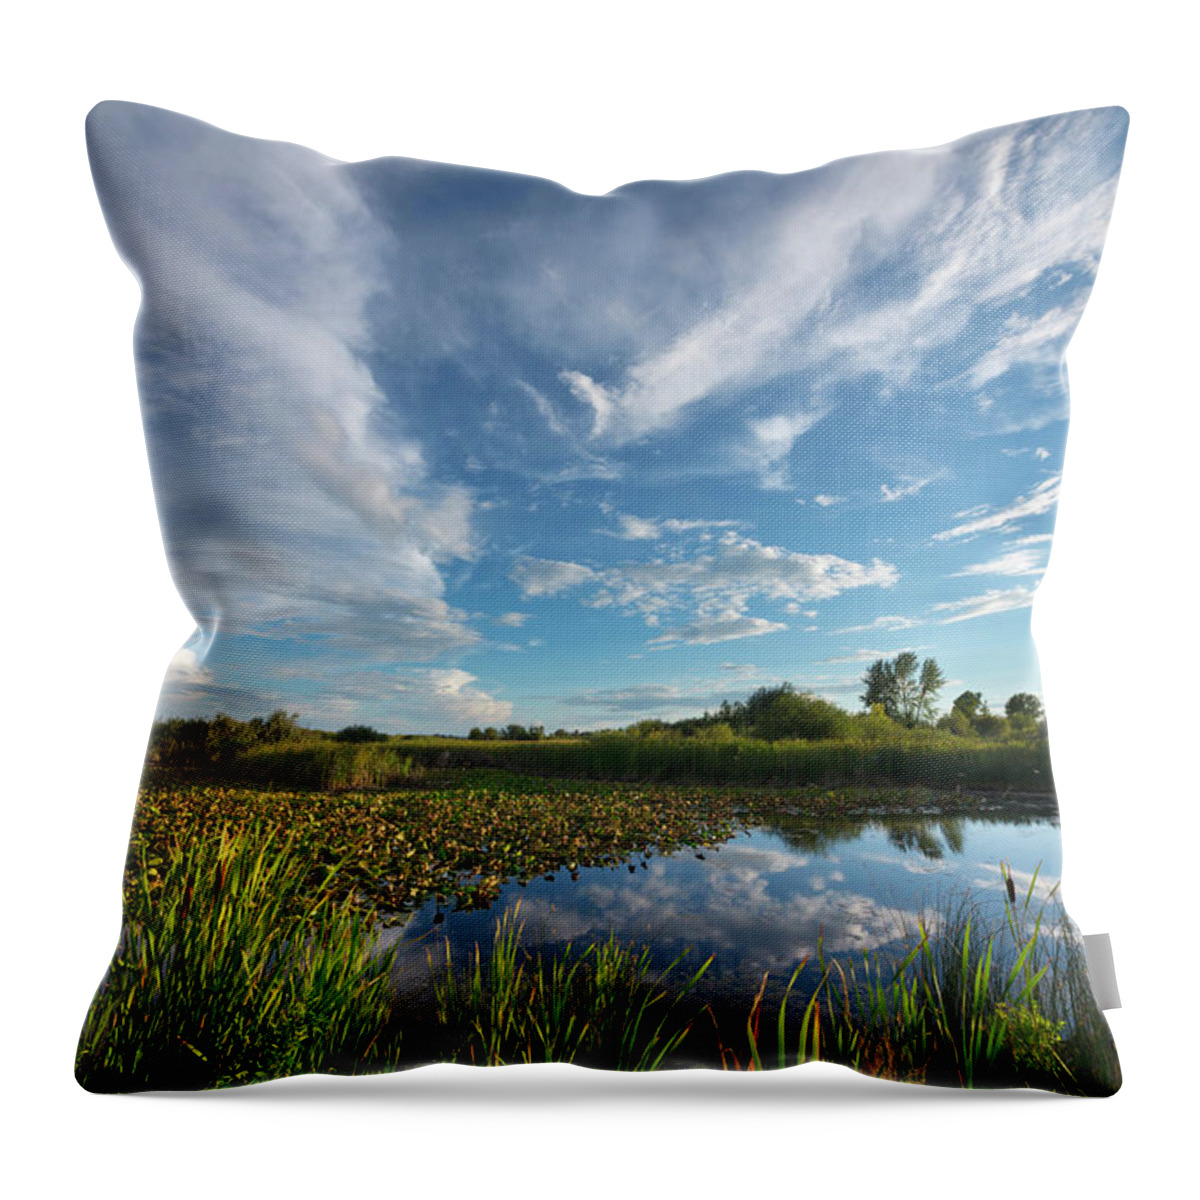 00559203 Throw Pillow featuring the photograph Clouds In the Snake River by Yva Momatiuk John Eastcott